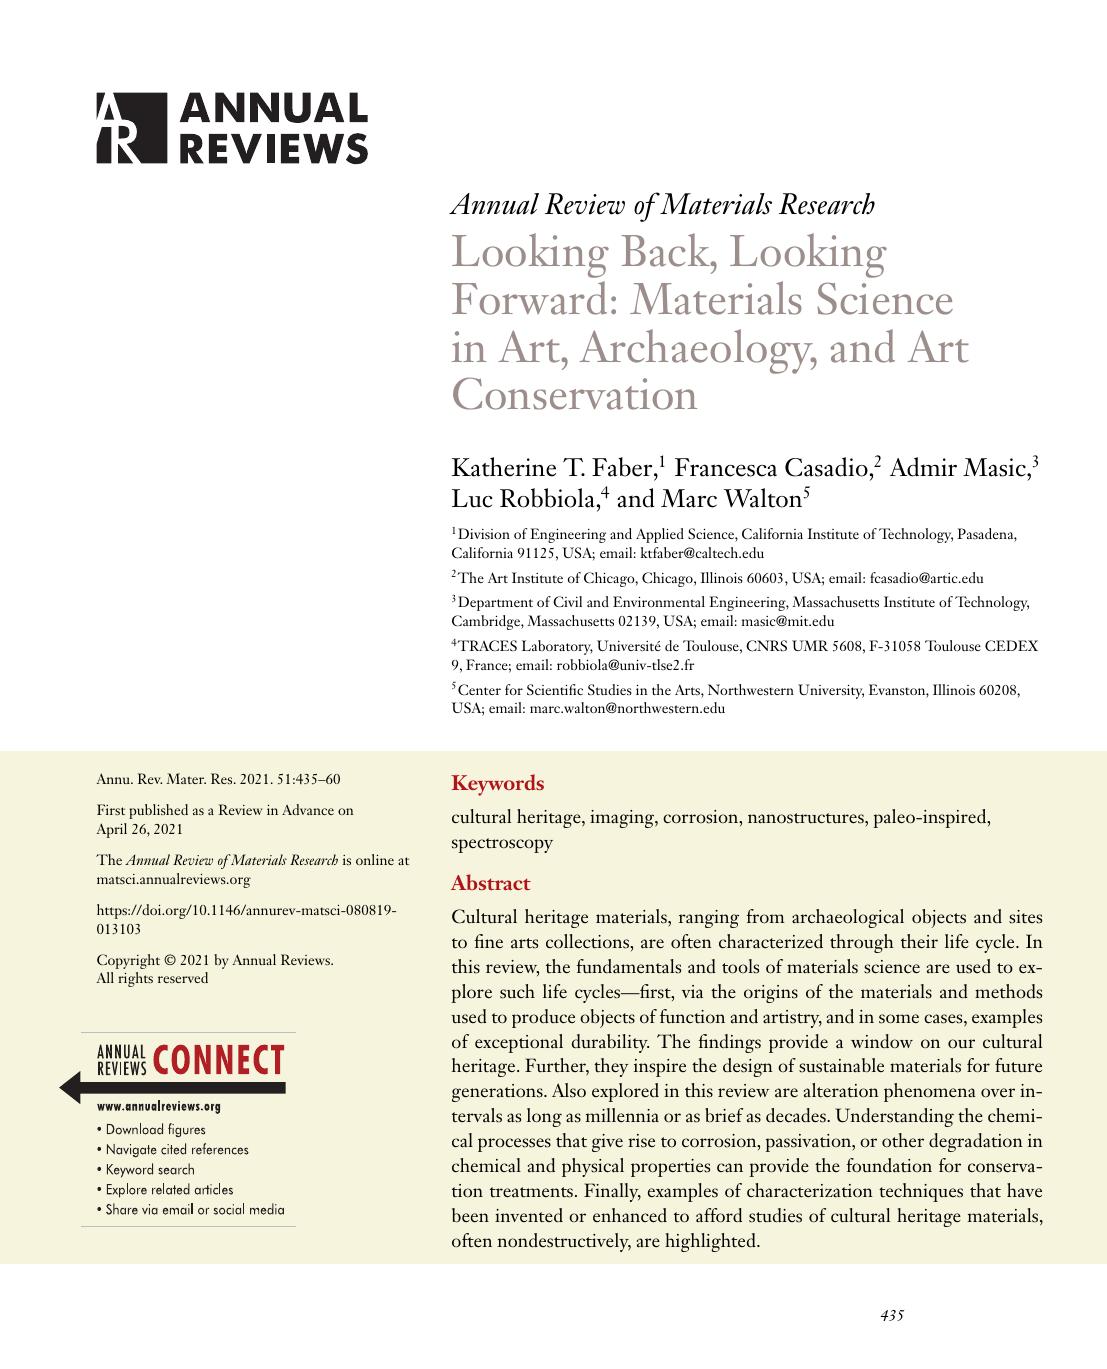 Looking Back, Looking Forward: Materials Science in Art, Archaeology, and Art Conservation by Katherine T. Faber Francesca Casadio Admir Masic Luc Robbiola Marc Walton